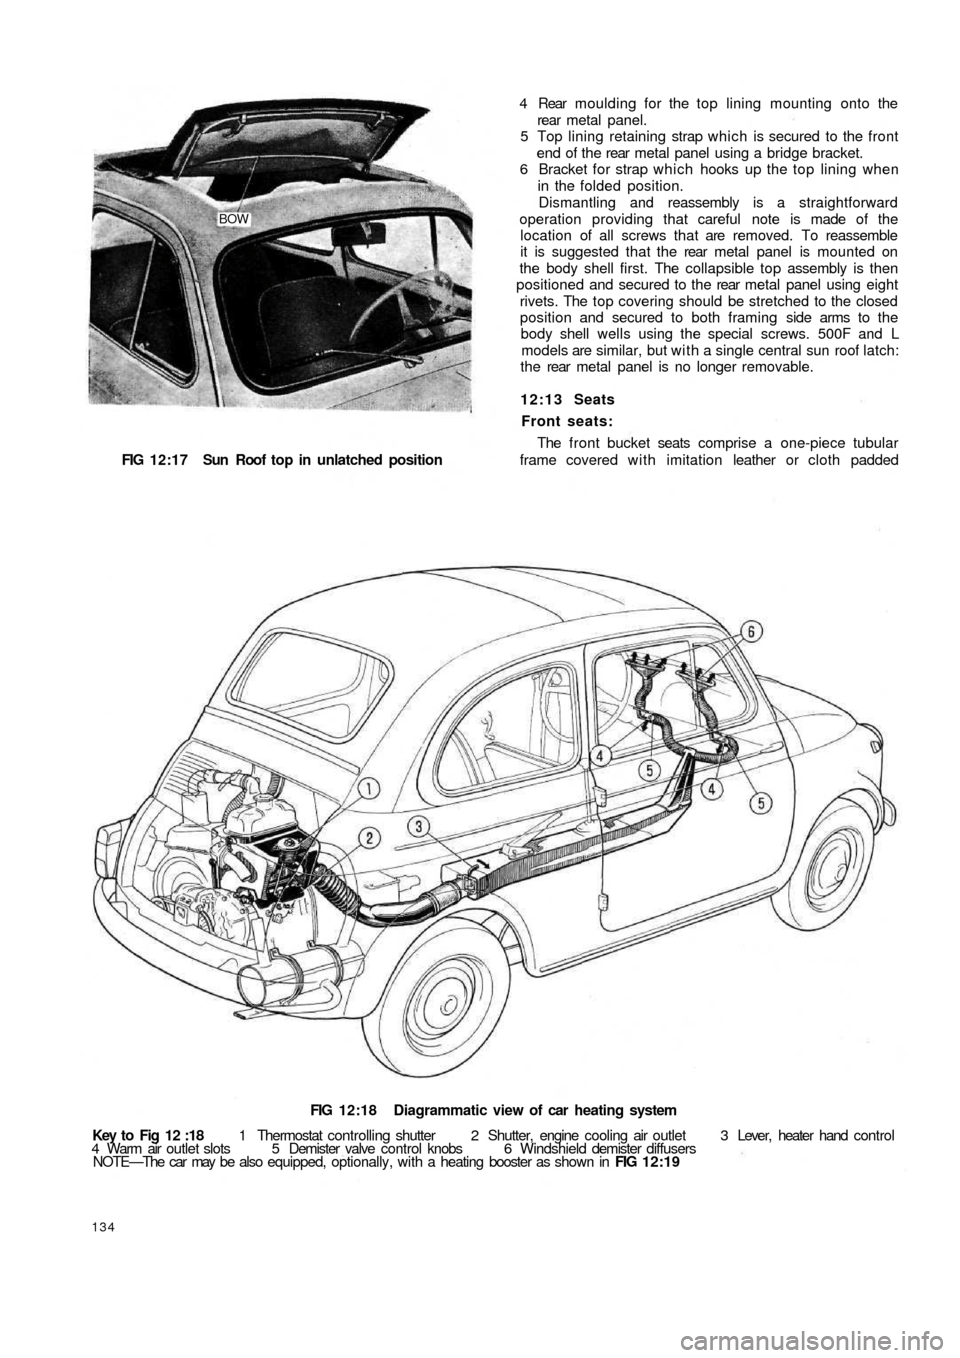 FIAT 500 1970 1.G Workshop Manual BOW
FIG 12:17  Sun Roof  top   in  unlatched position
FIG 12:18 Diagrammatic view of car heating system
Key to Fig 12 :18 1 Thermostat controlling shutter  2  Shutter,  engine  cooling air outlet  3 L